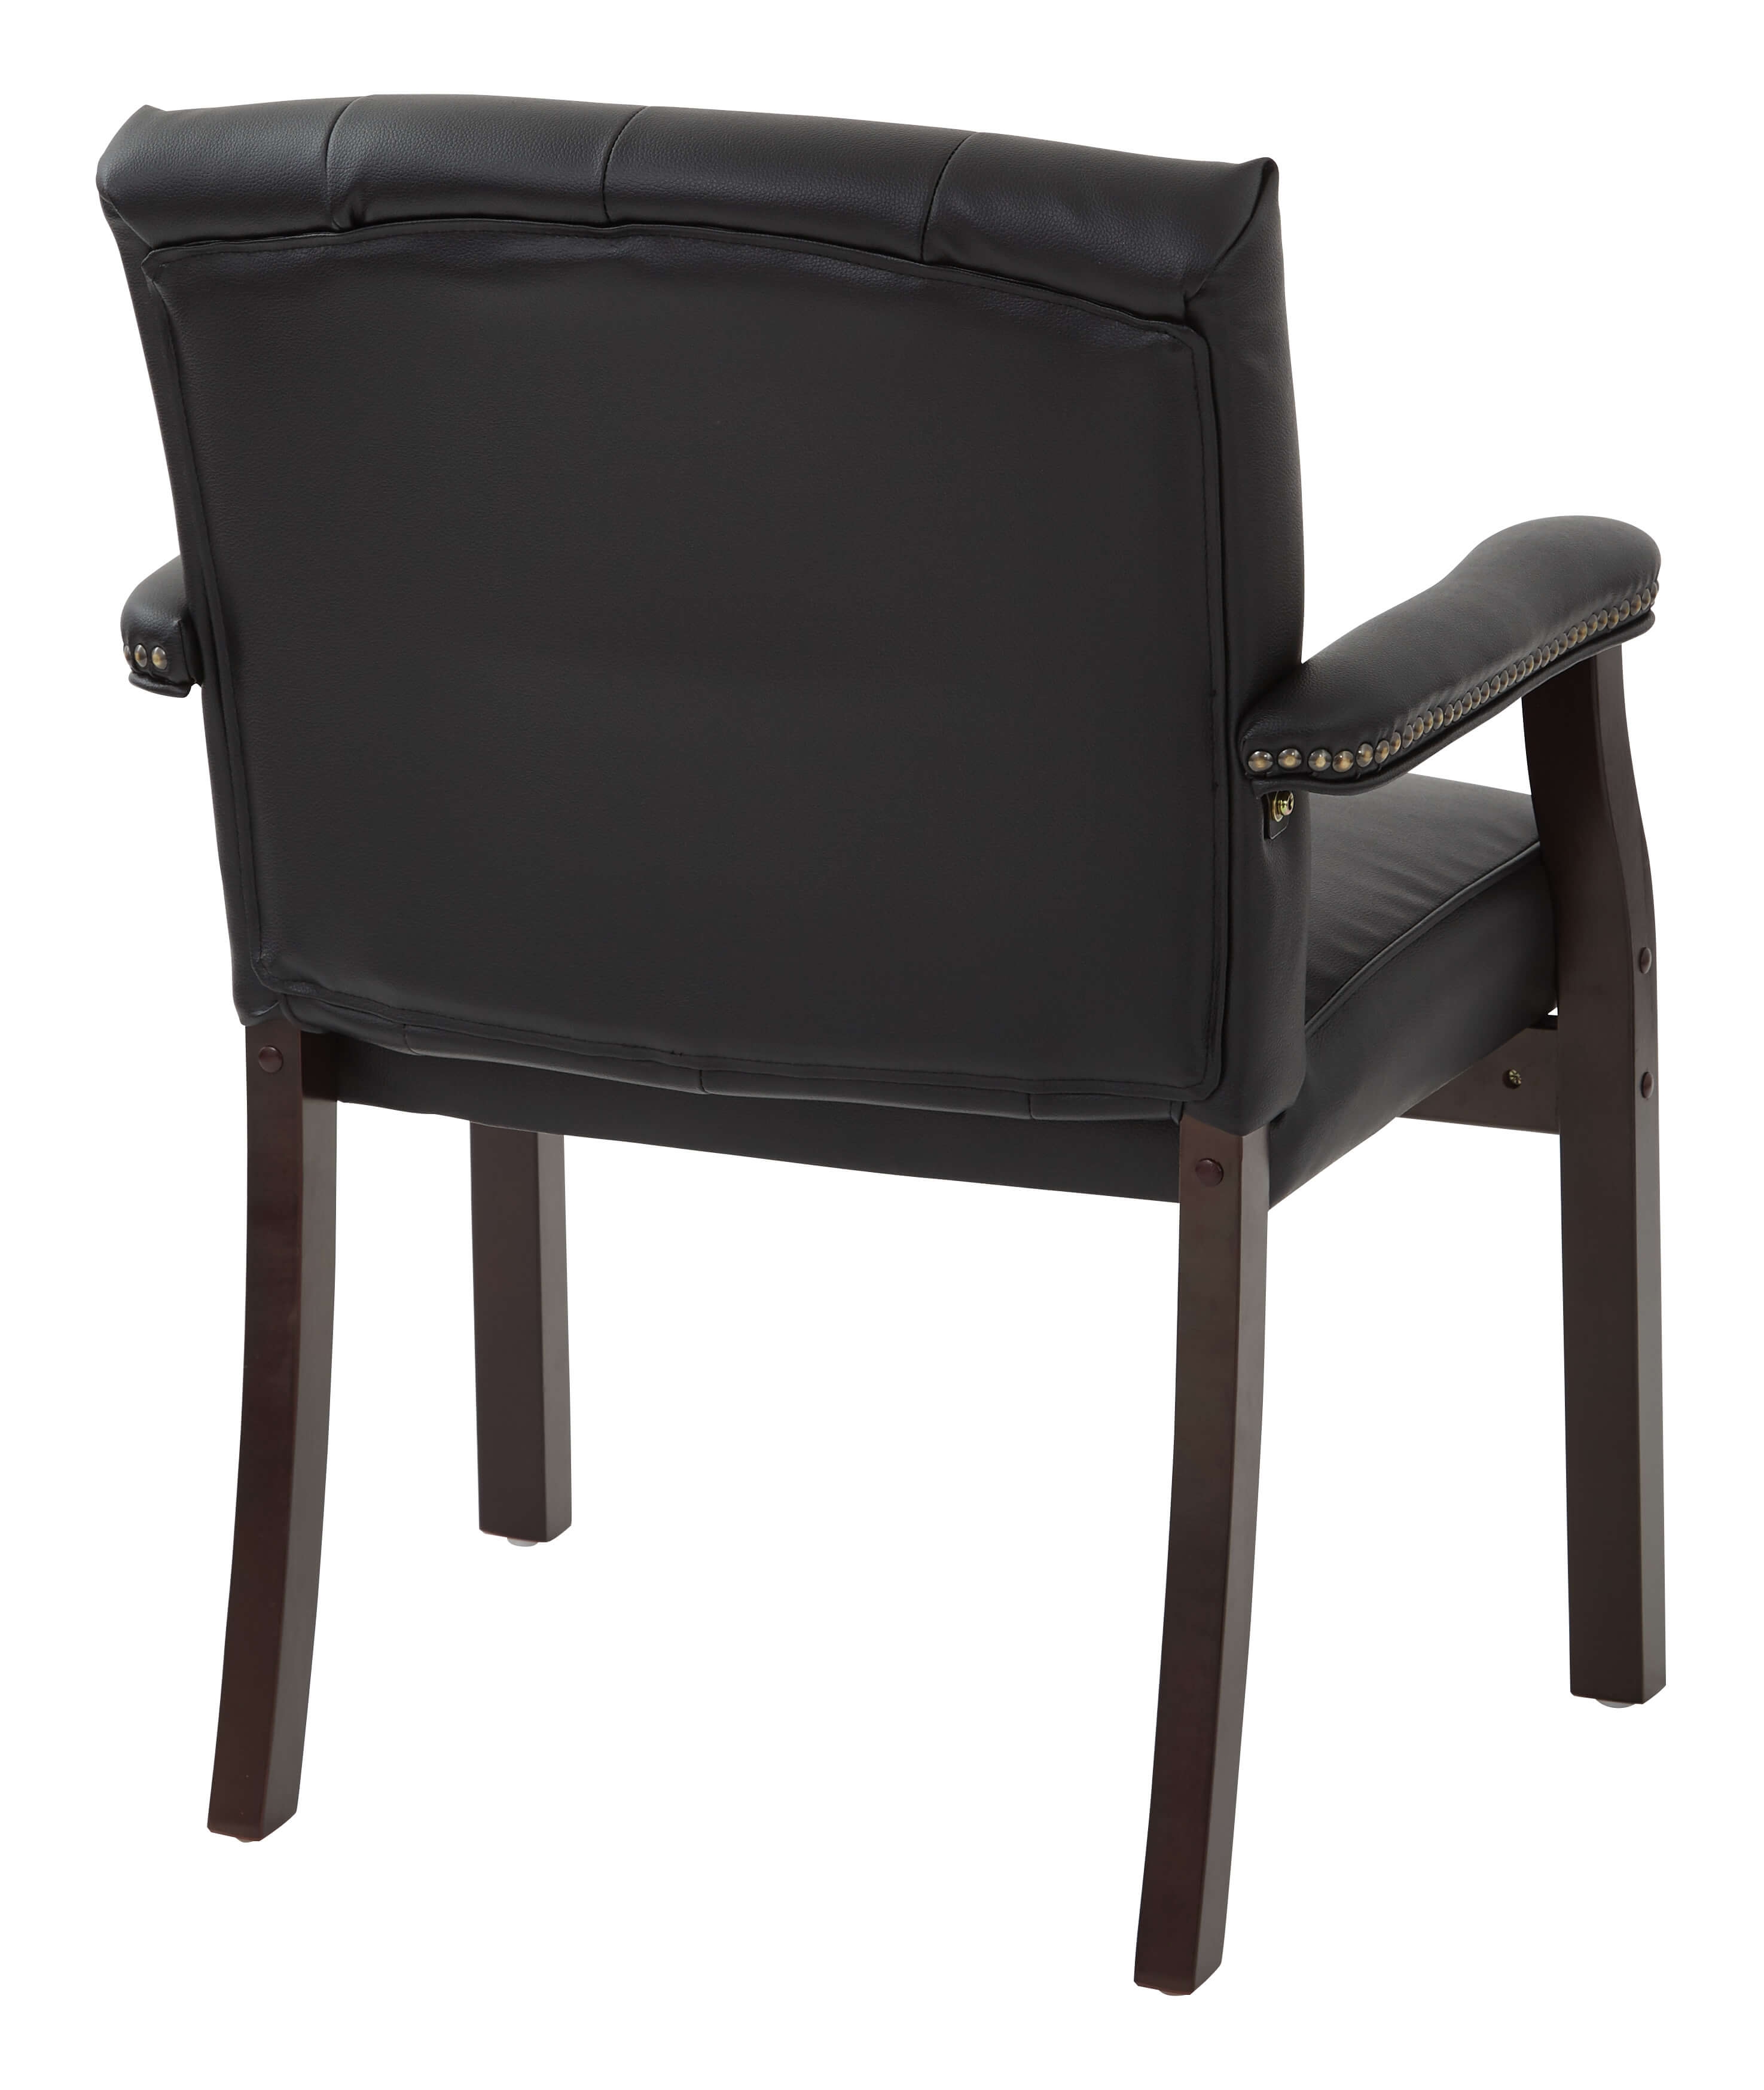 Lounge chair for office back